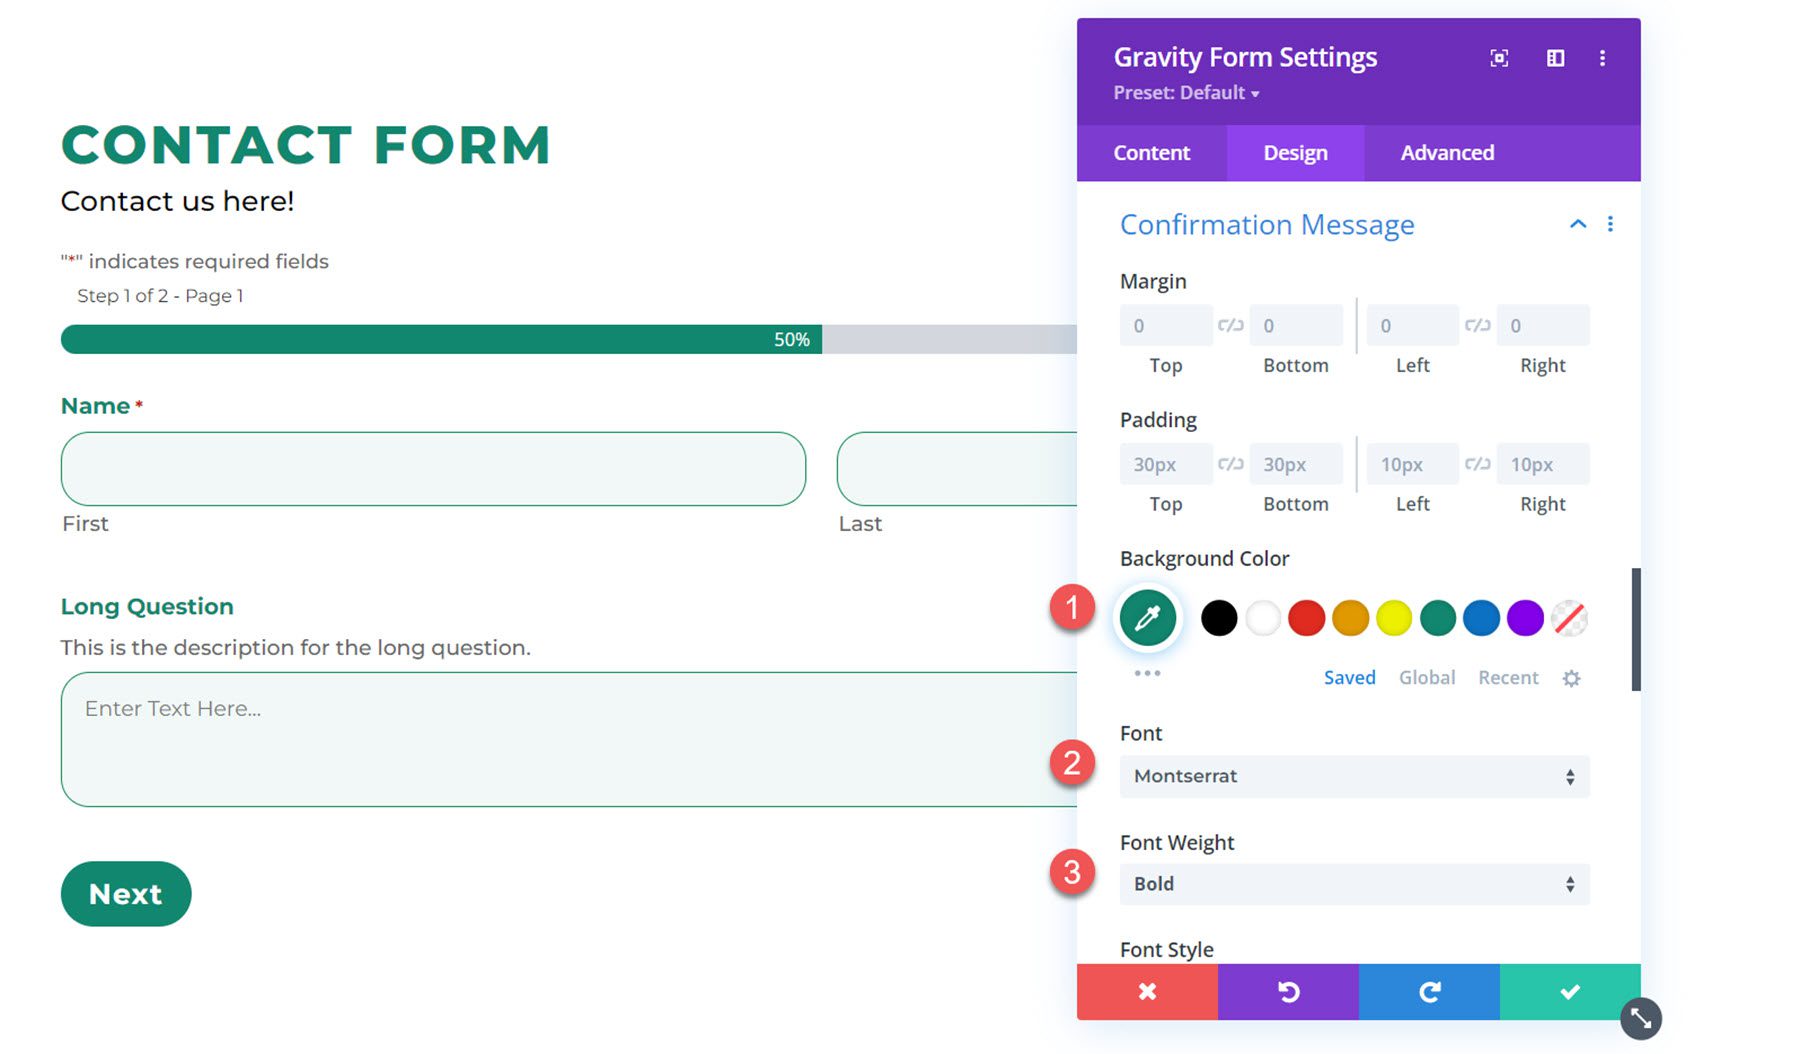 Divi Plugin Highlight Divi Gravity Forms Confirmation Message Settings